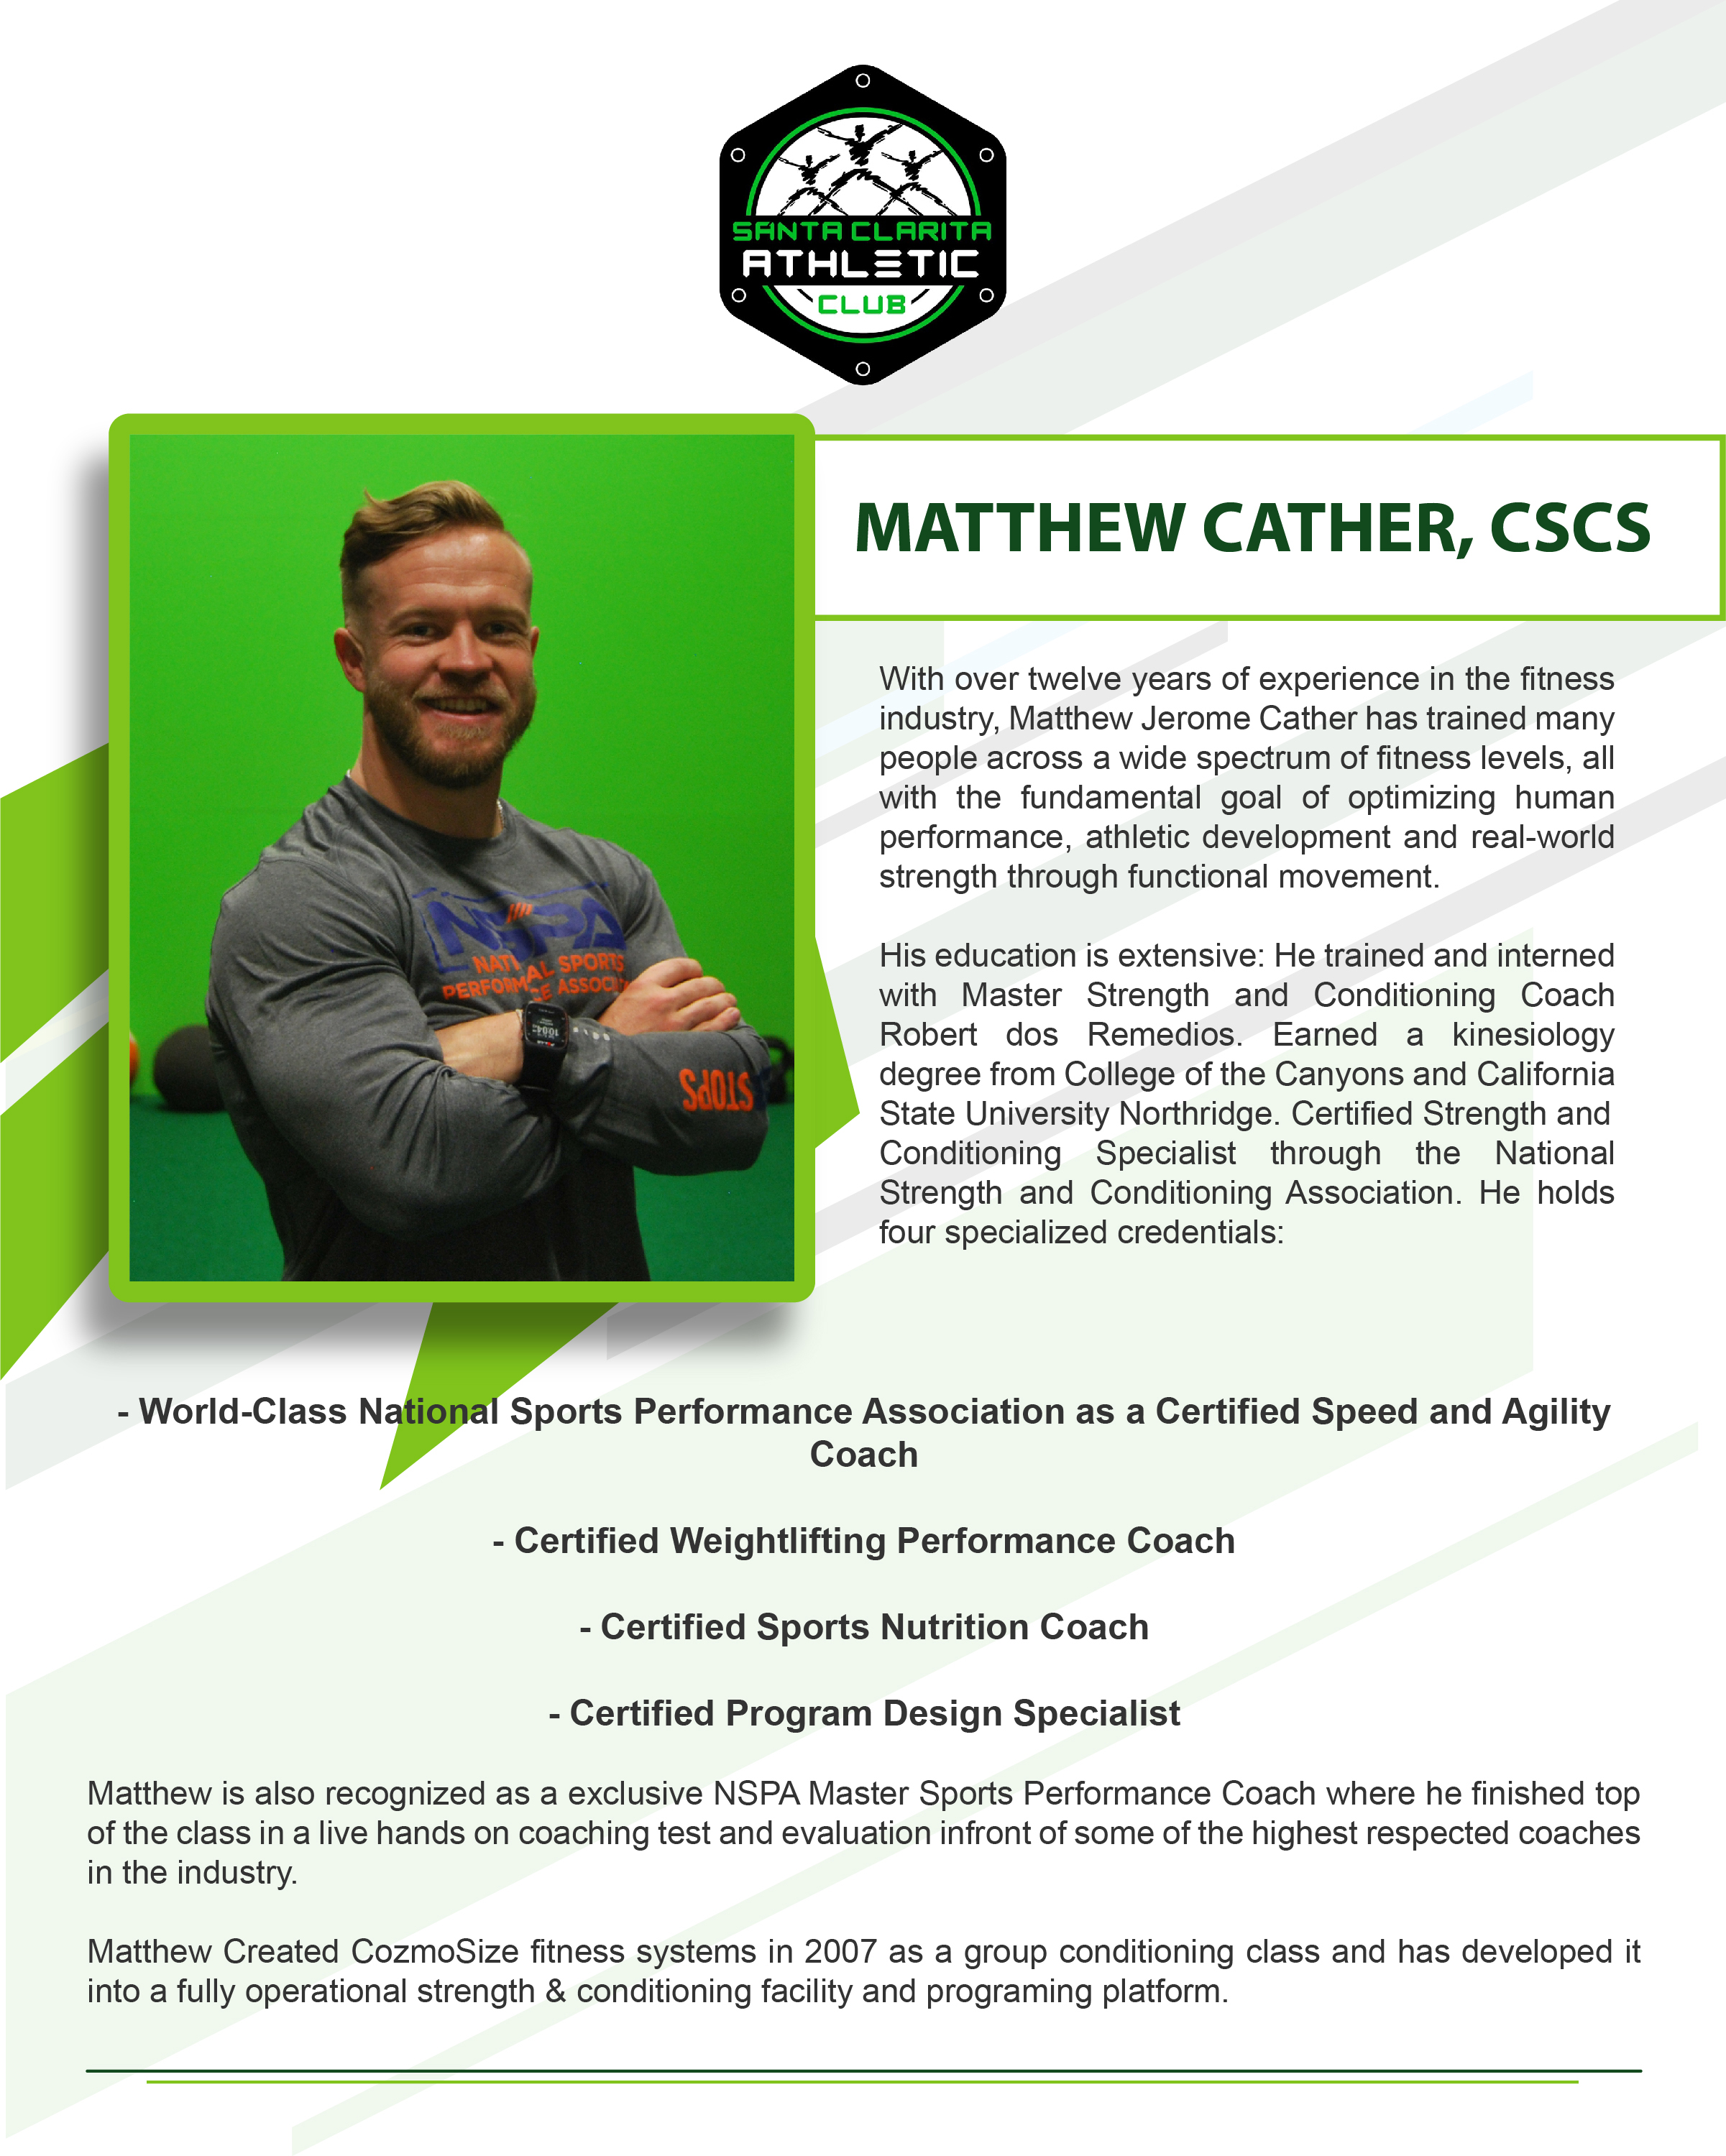 Matthew Cather - CSCS Certified Personal Trainer